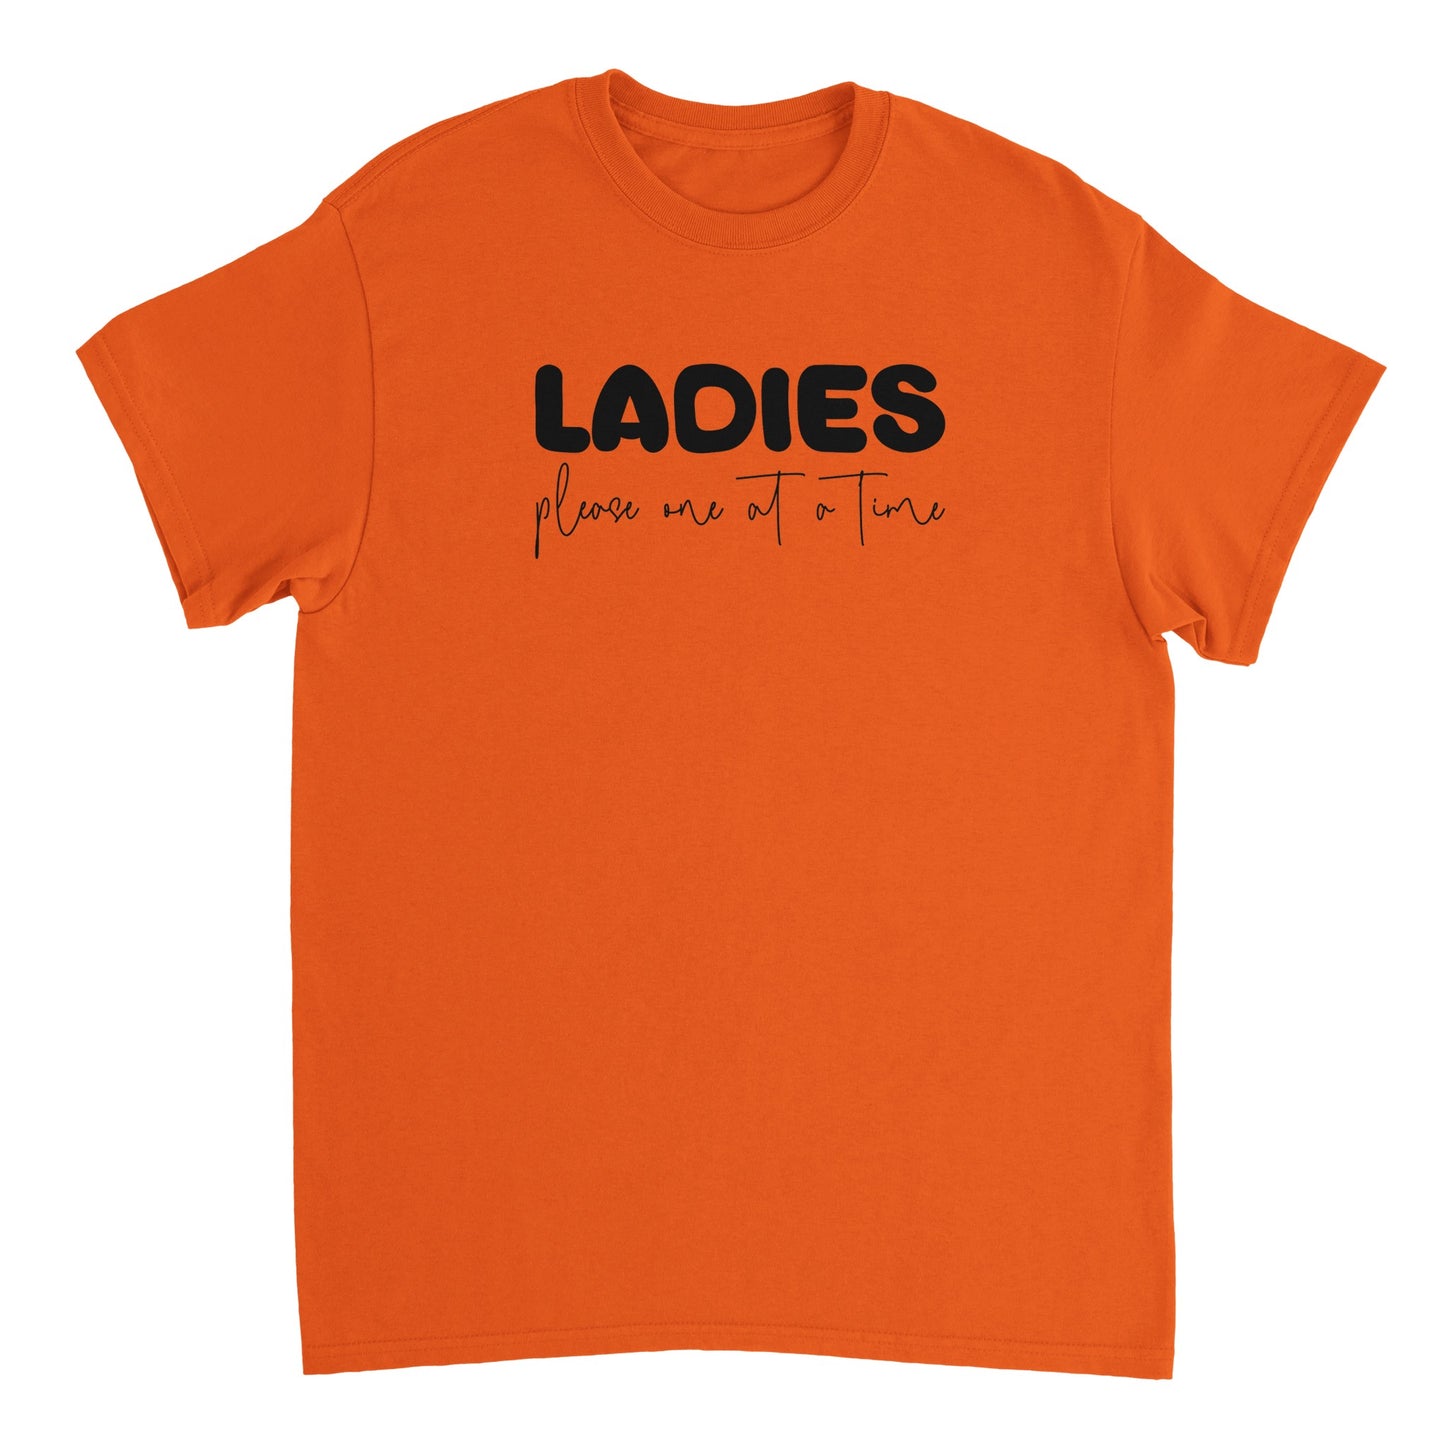 Ladies Please T-shirt - Mister Snarky's